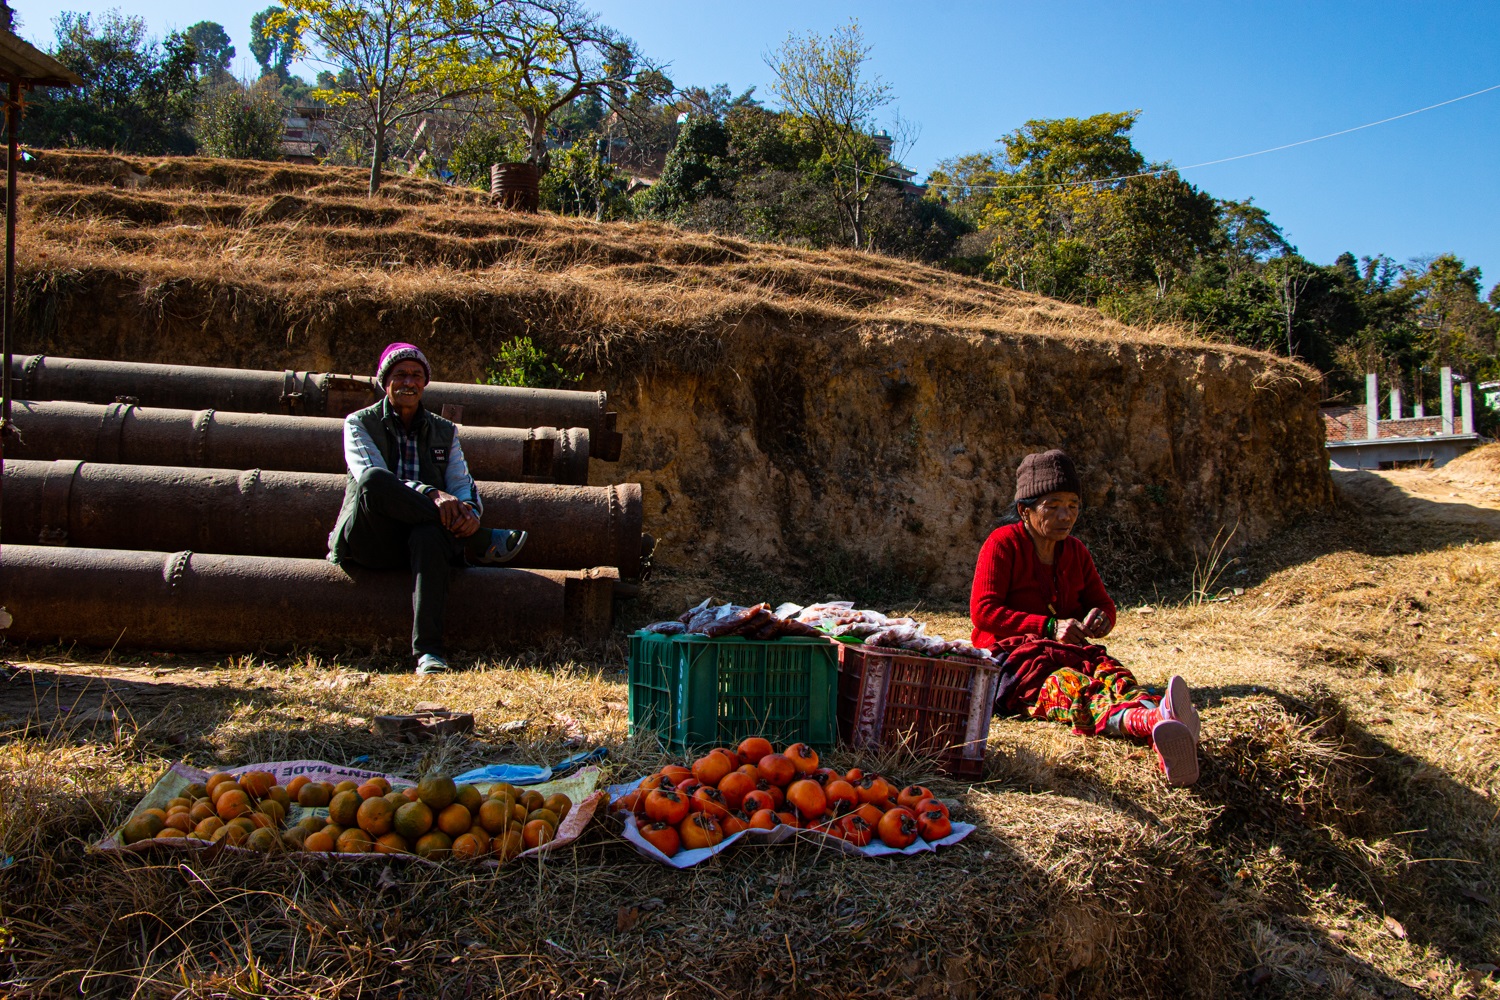 A couple selling oranges